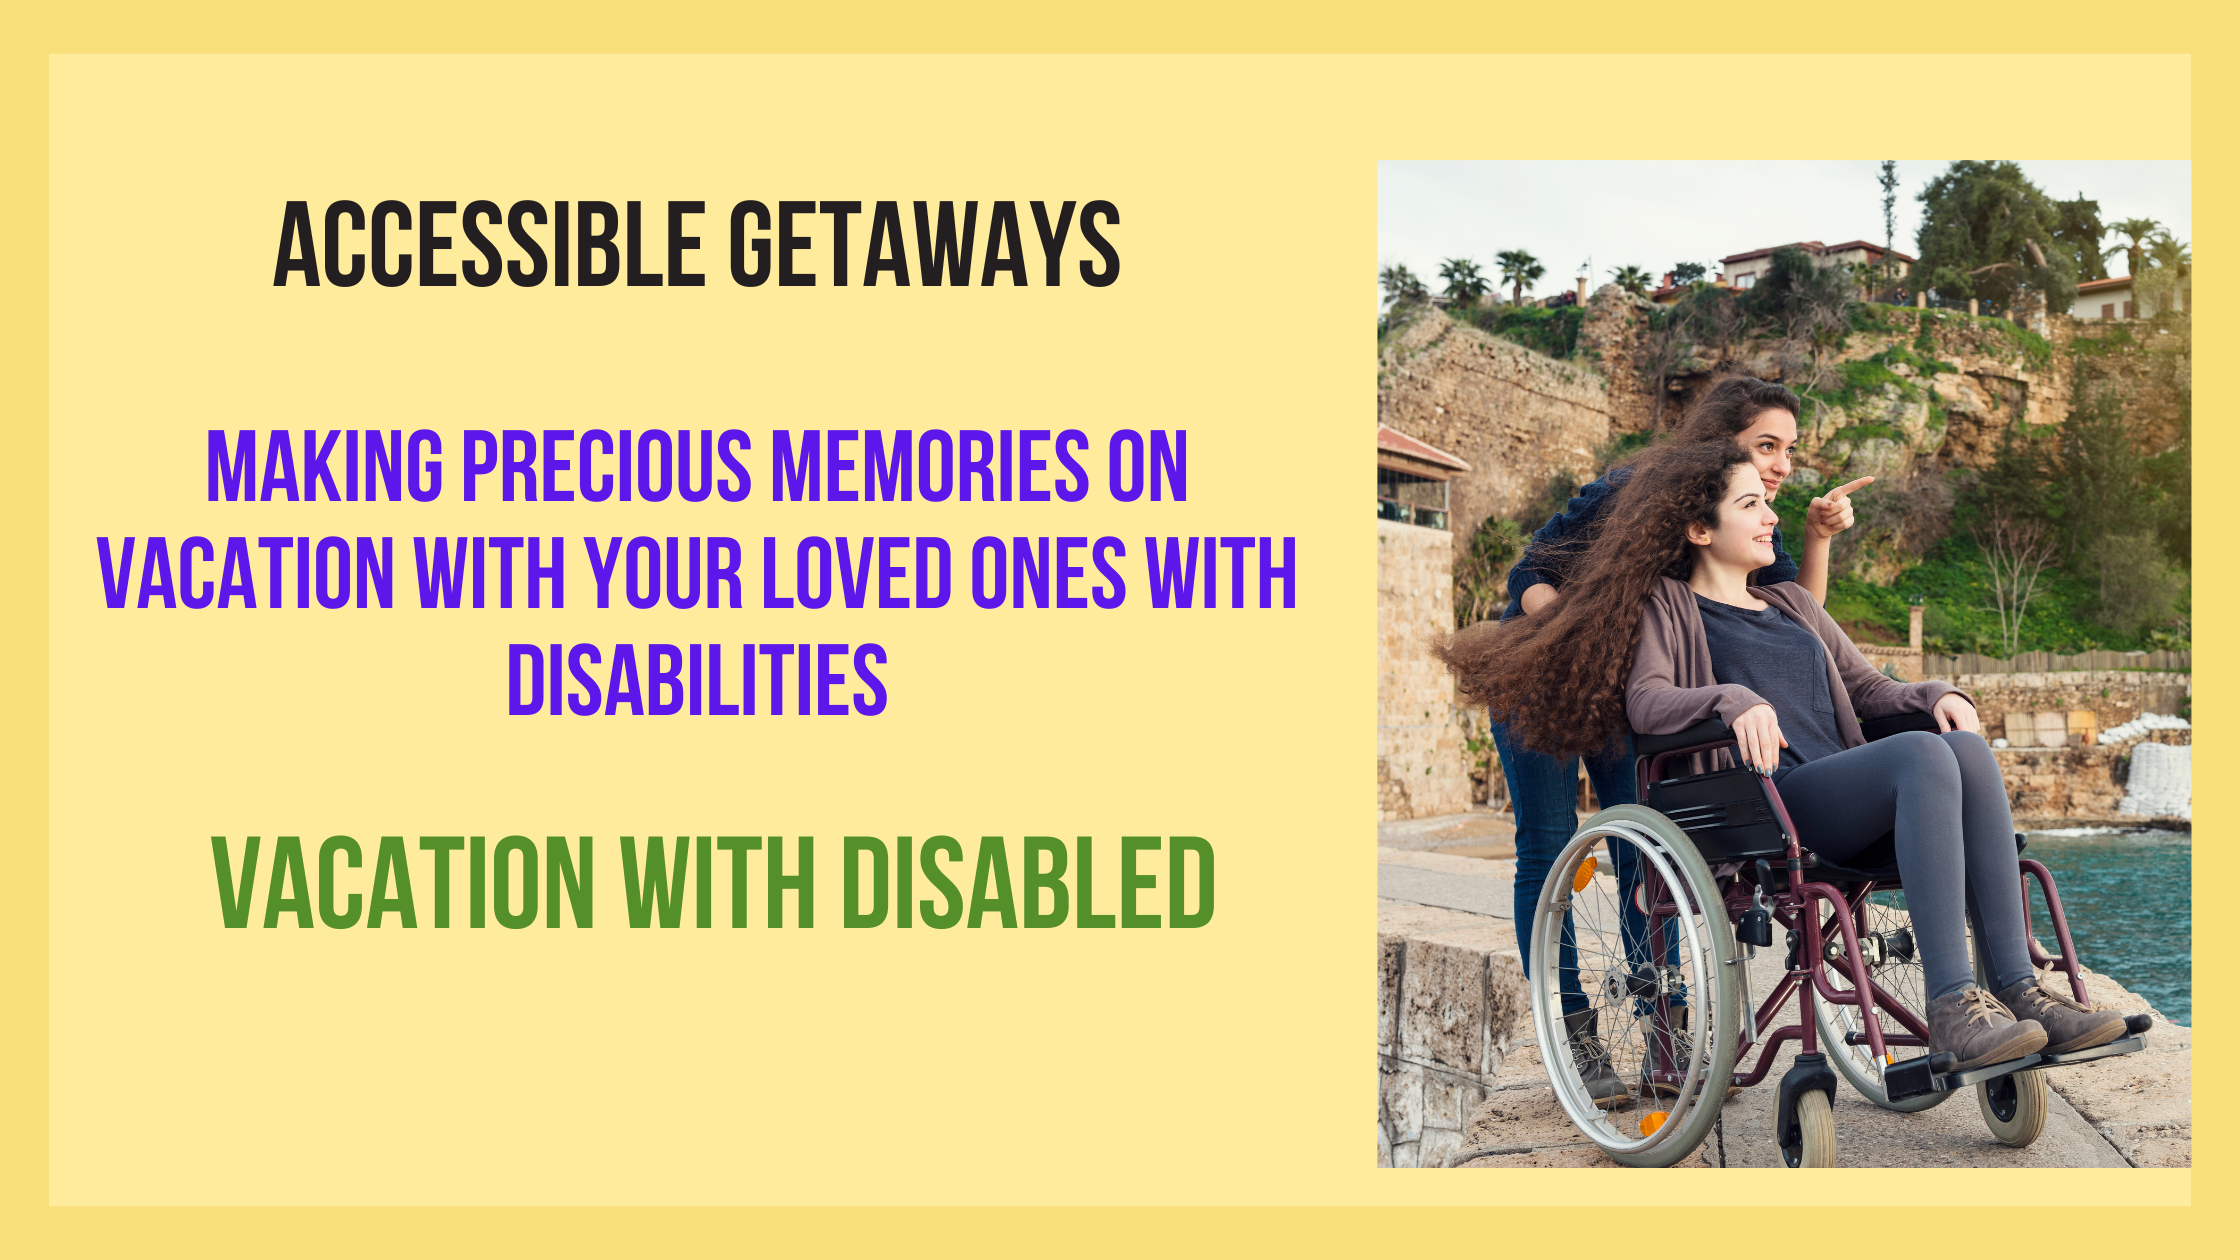 Planning a Seamless Vacation with Disabled Family Members